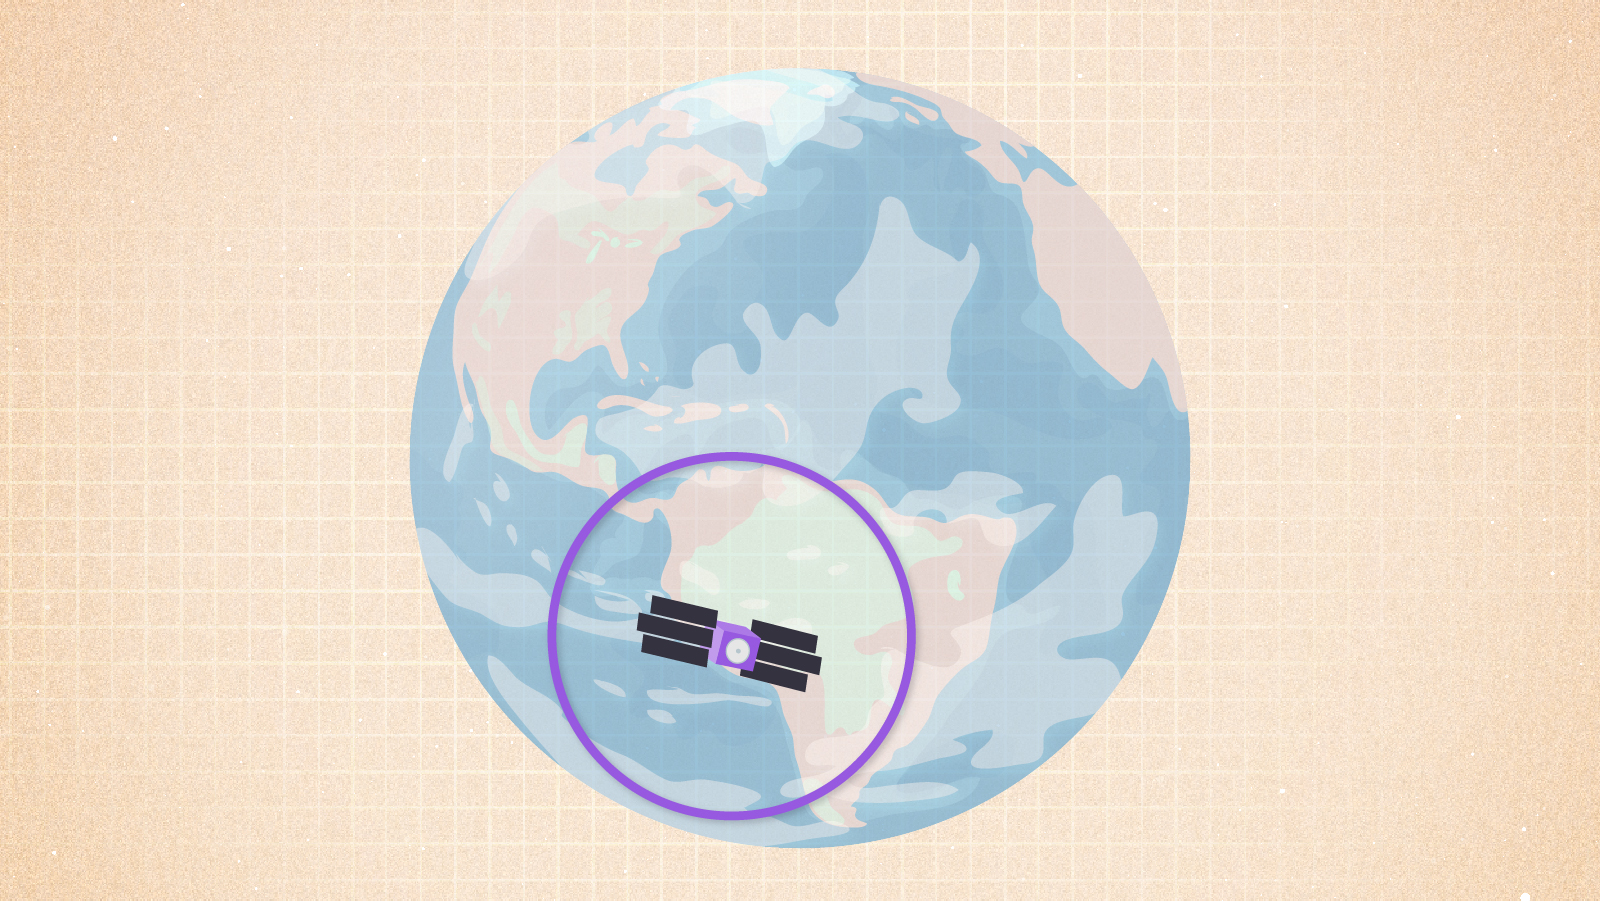 A satellite with a purple circle around it is shown above Earth.